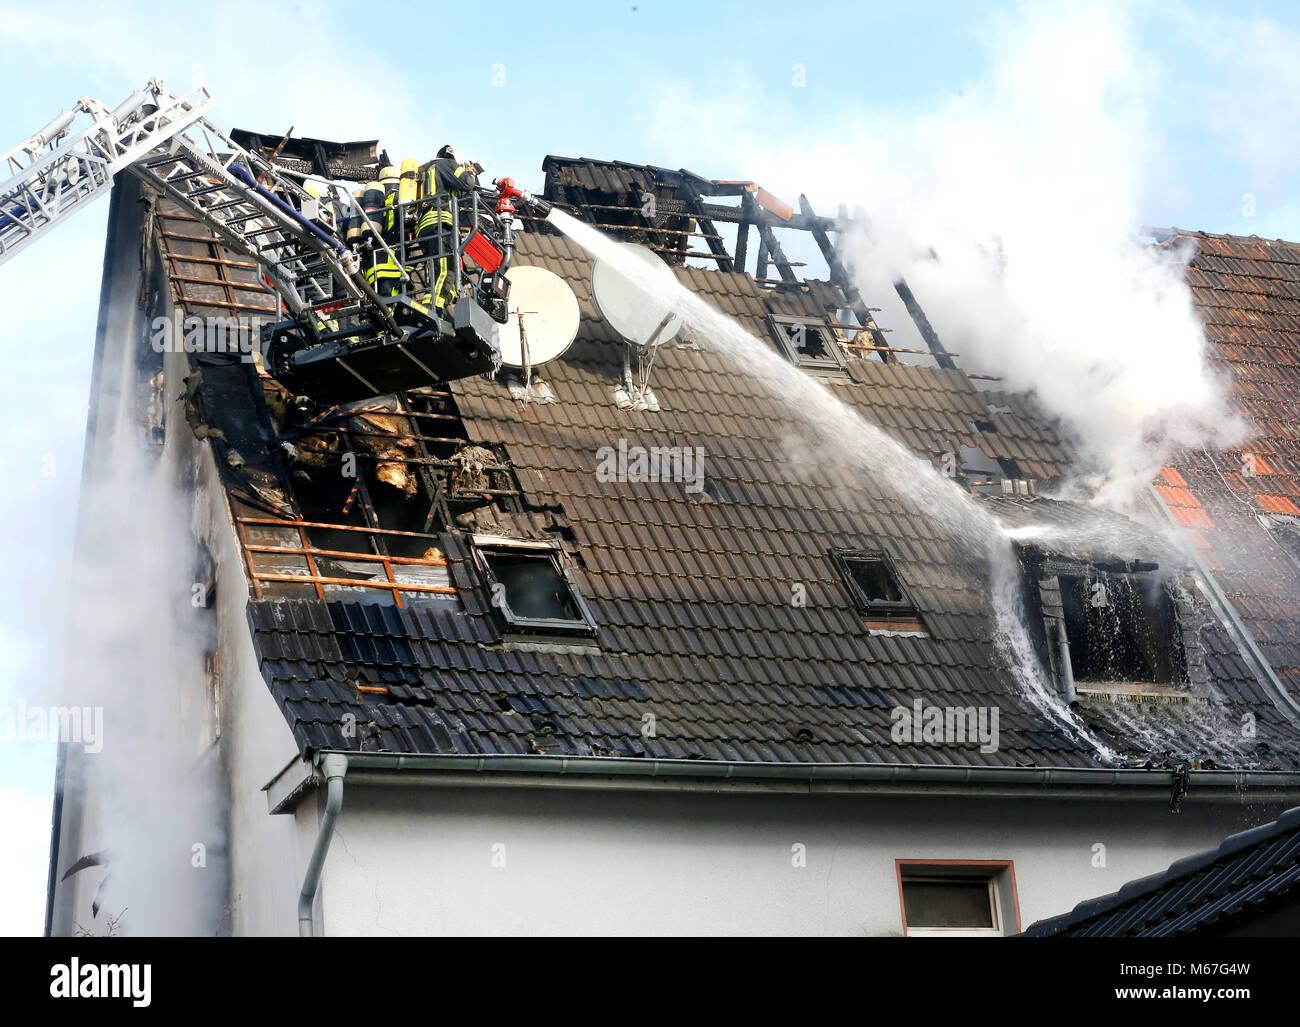 01 March 2018, Germany, Gelsenkirchen: Firefighters extinguish the attic fire in a multiple family dwelling. Several people were injured, one person is still missing. Photo: Roland Weihrauch/dpa Stock Photo